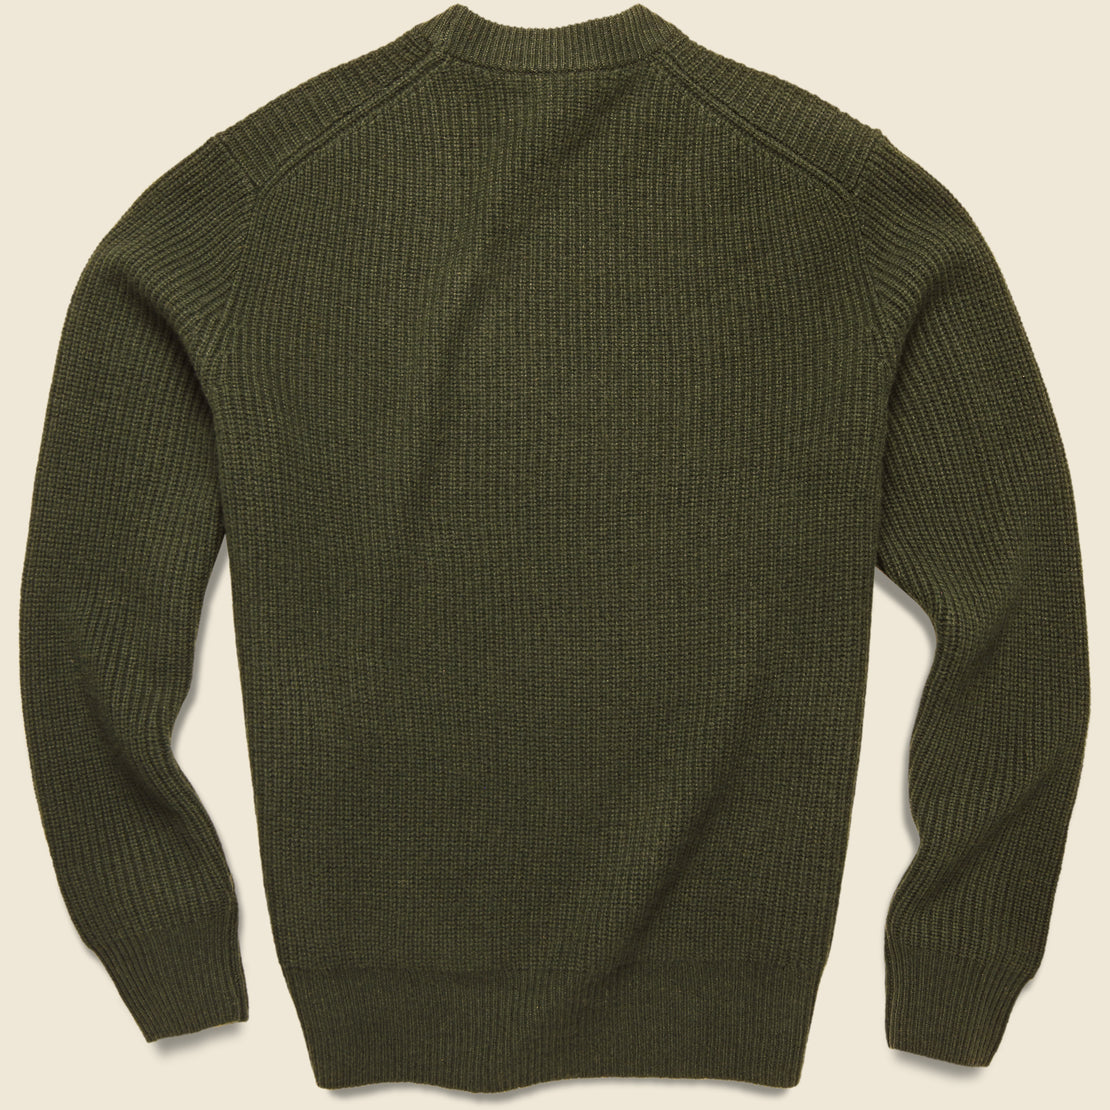 Cashmere Jordan Sweater - Deep Olive - Alex Mill - STAG Provisions - Tops - Sweater